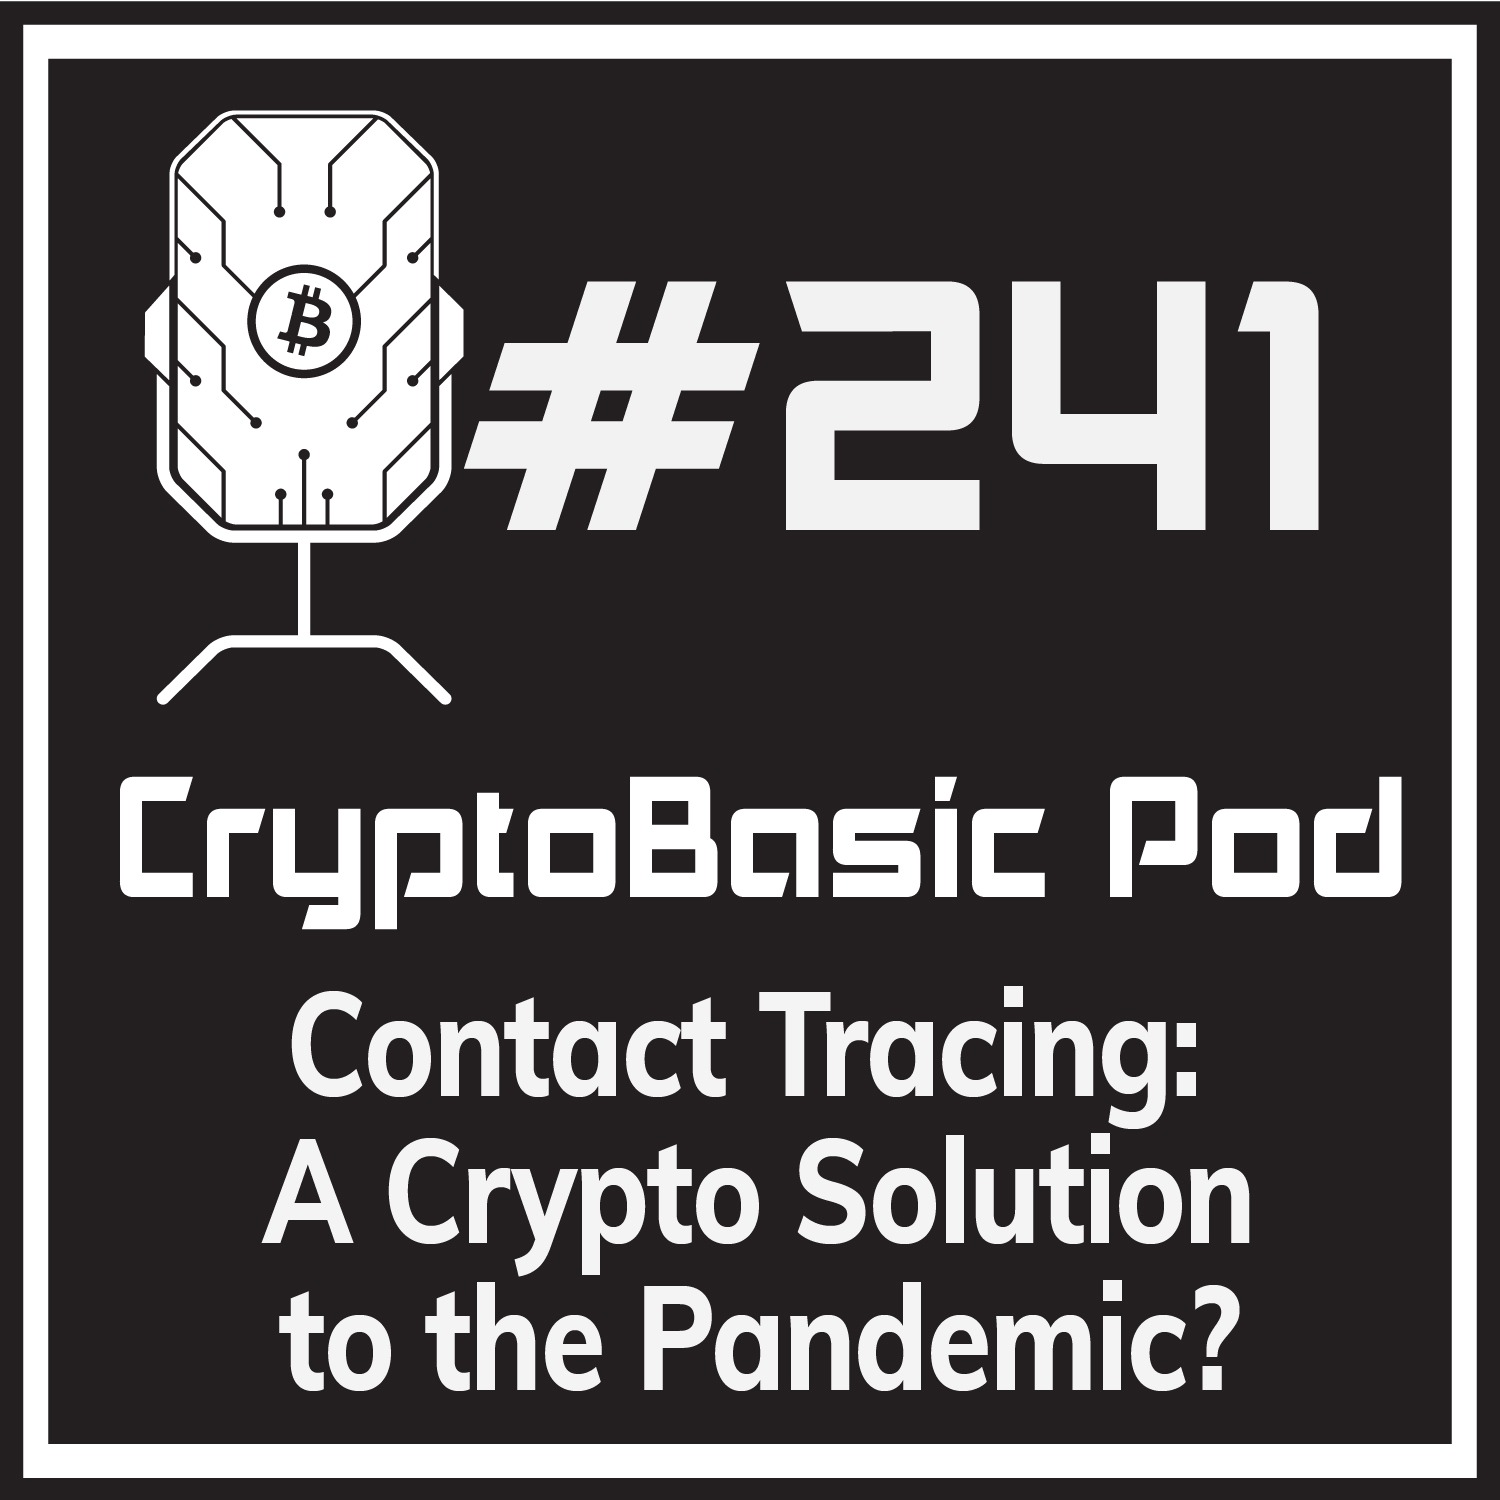 Episode 241 - Contact Tracing: A Crypto Solution to the Pandemic?